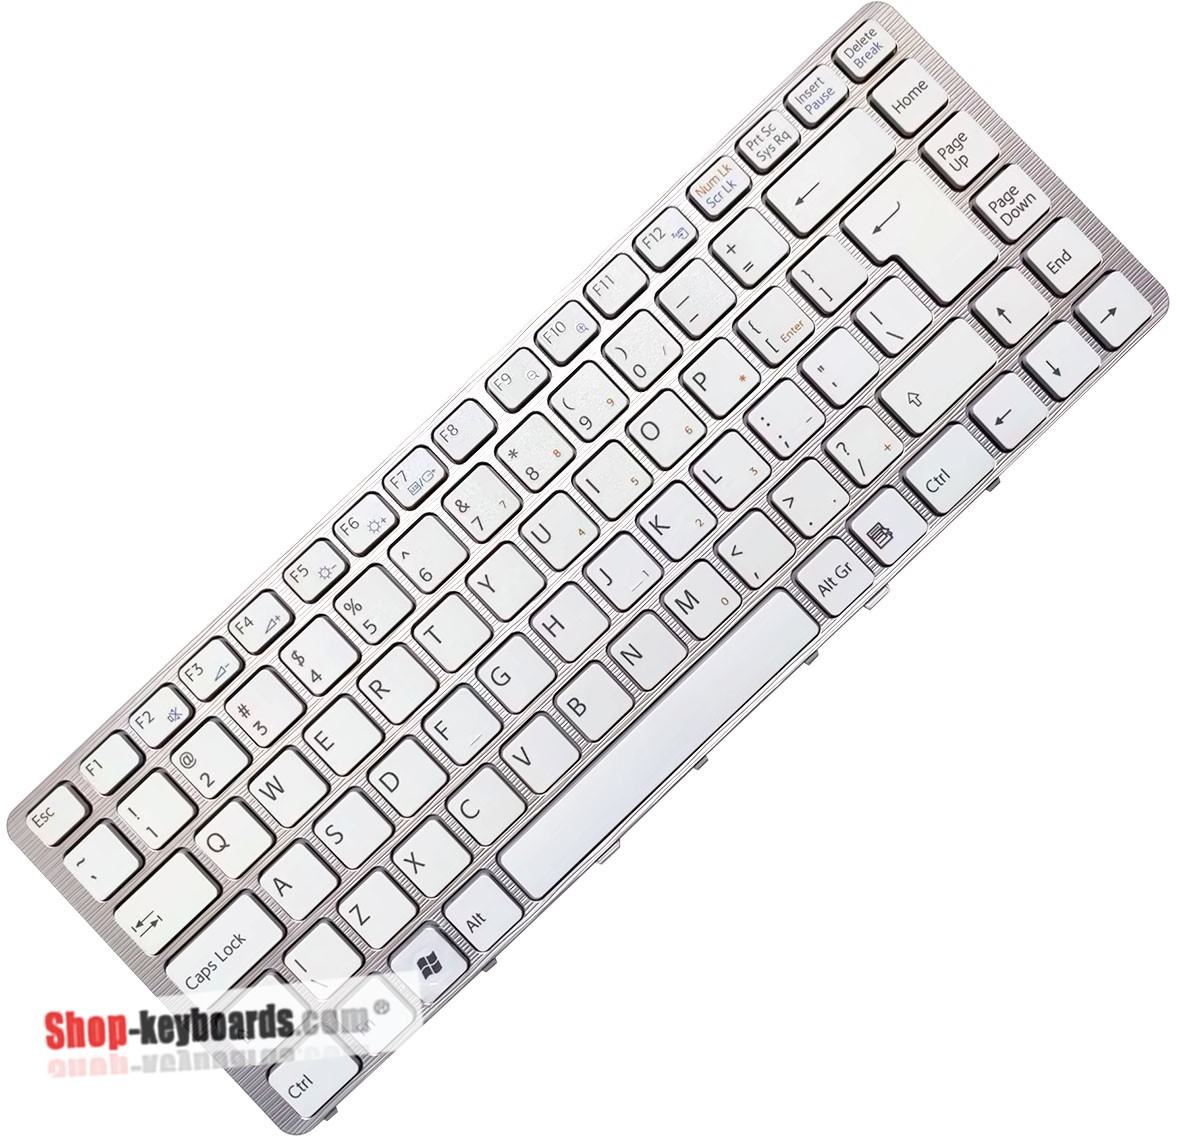 Sony VAIO VGN-NW20SF Keyboard replacement